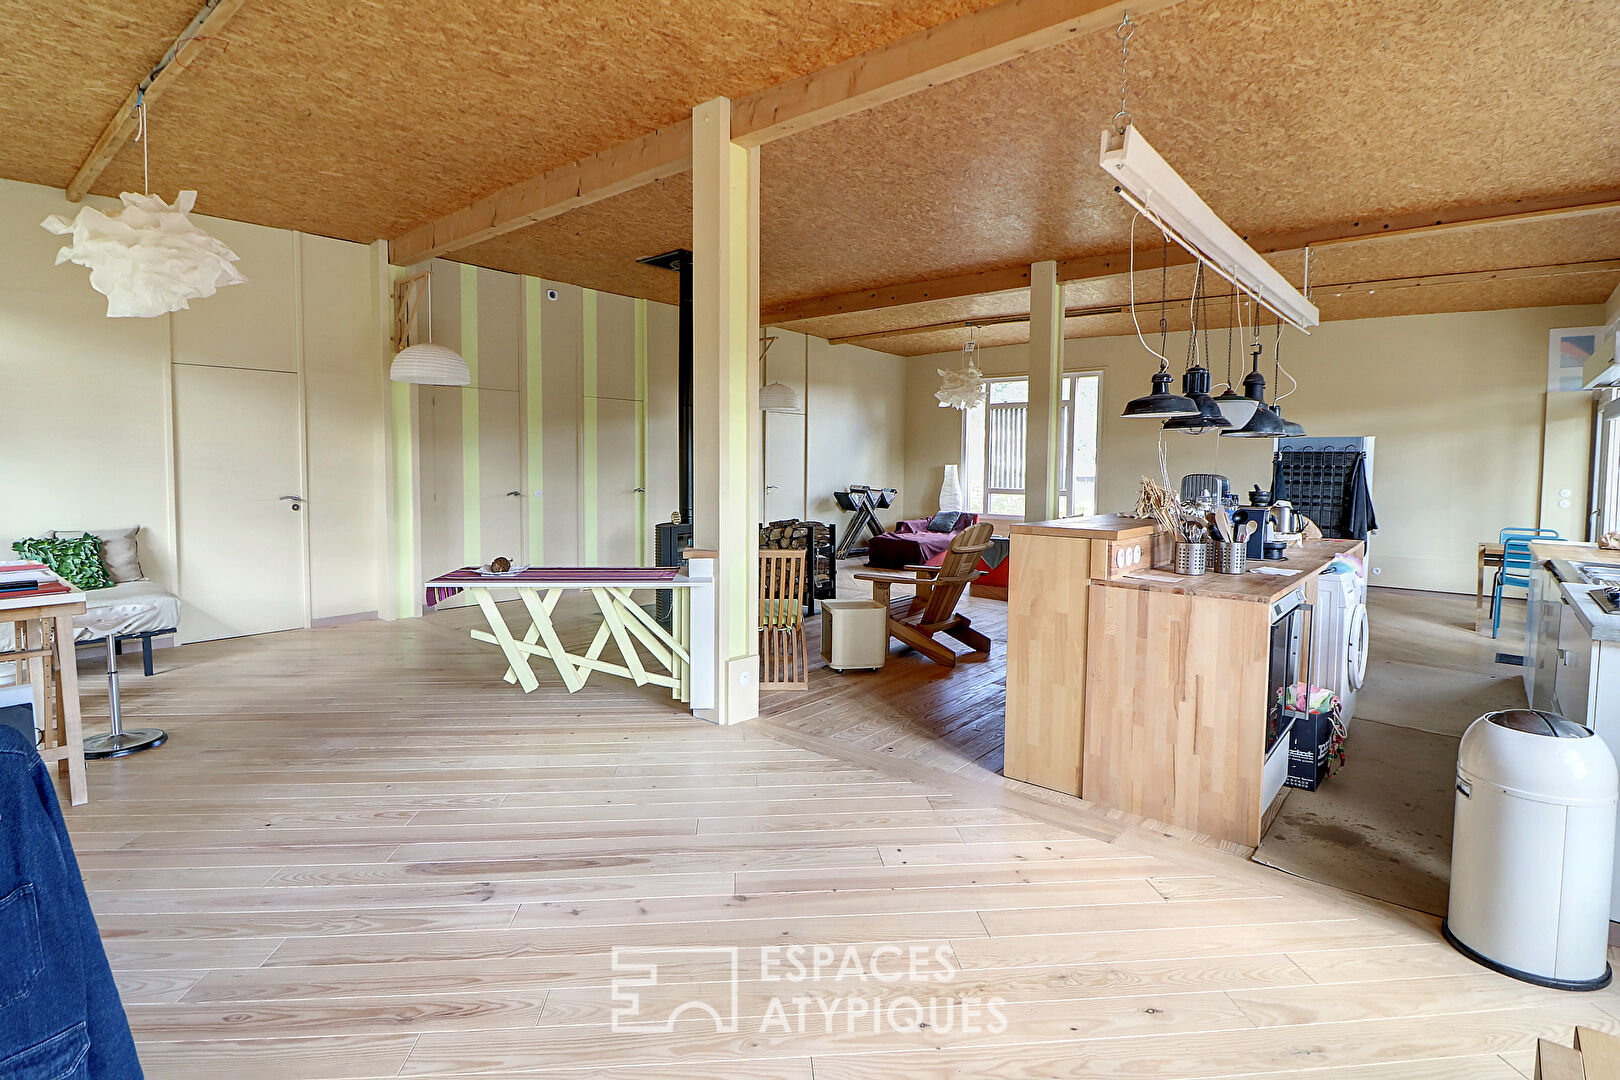 Wooden frame artist’s house – eco-responsible